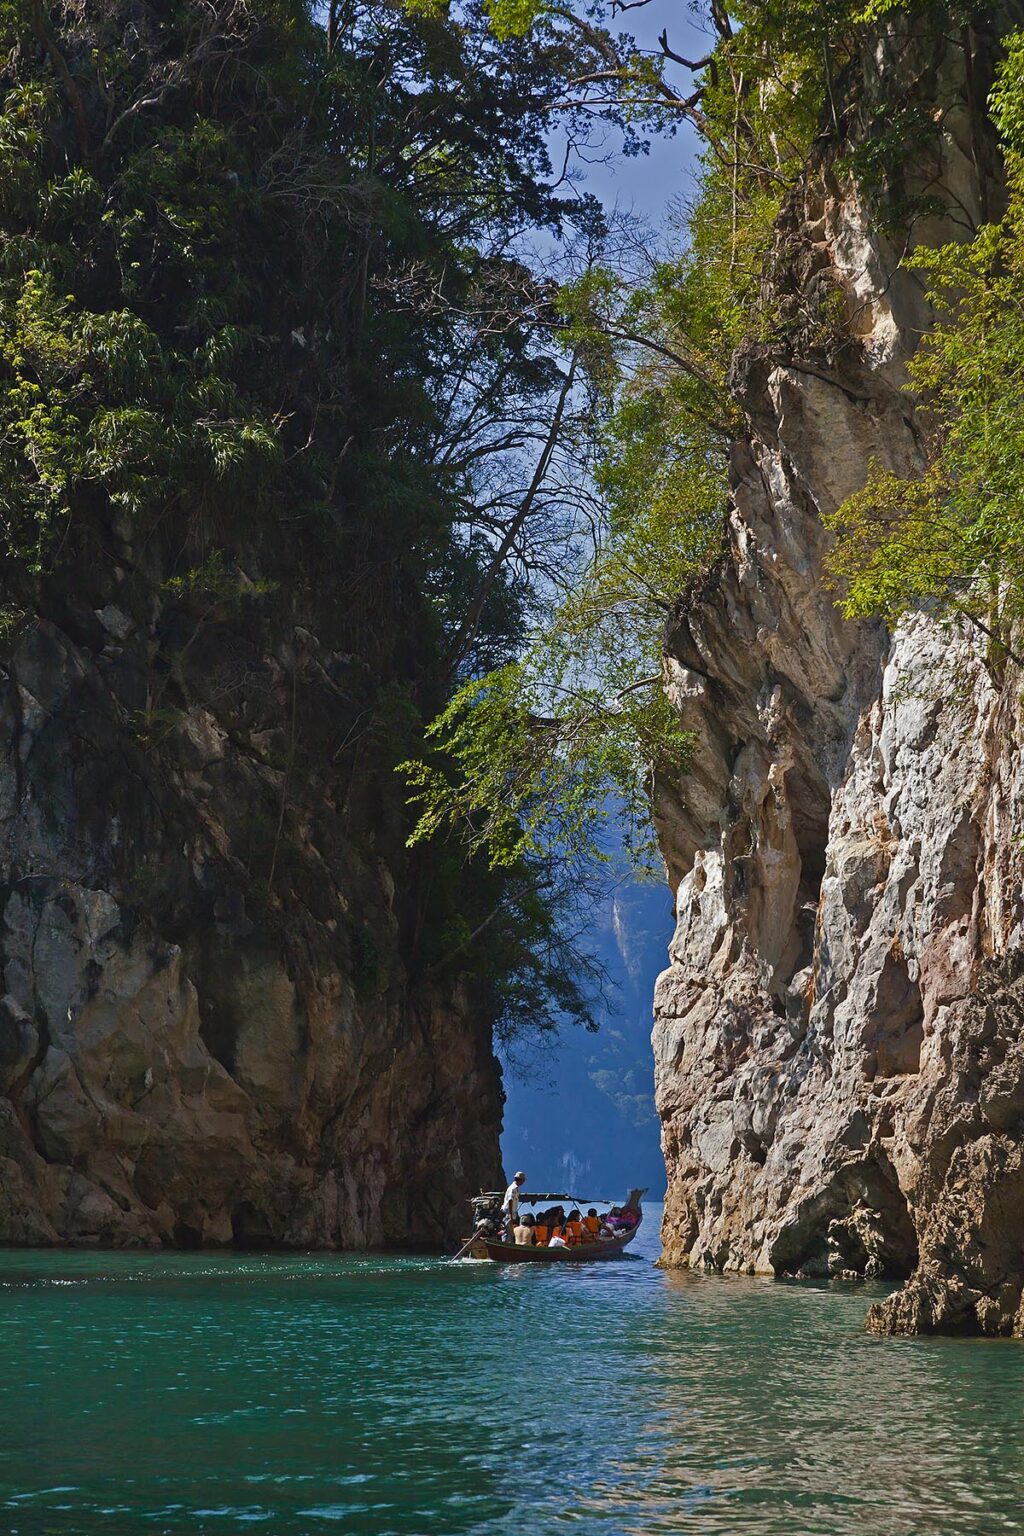 TOURISTS enjoy a boat ride on CHEOW EN LAKE in KHAO SOK NATIONAL PARK - THAILAND